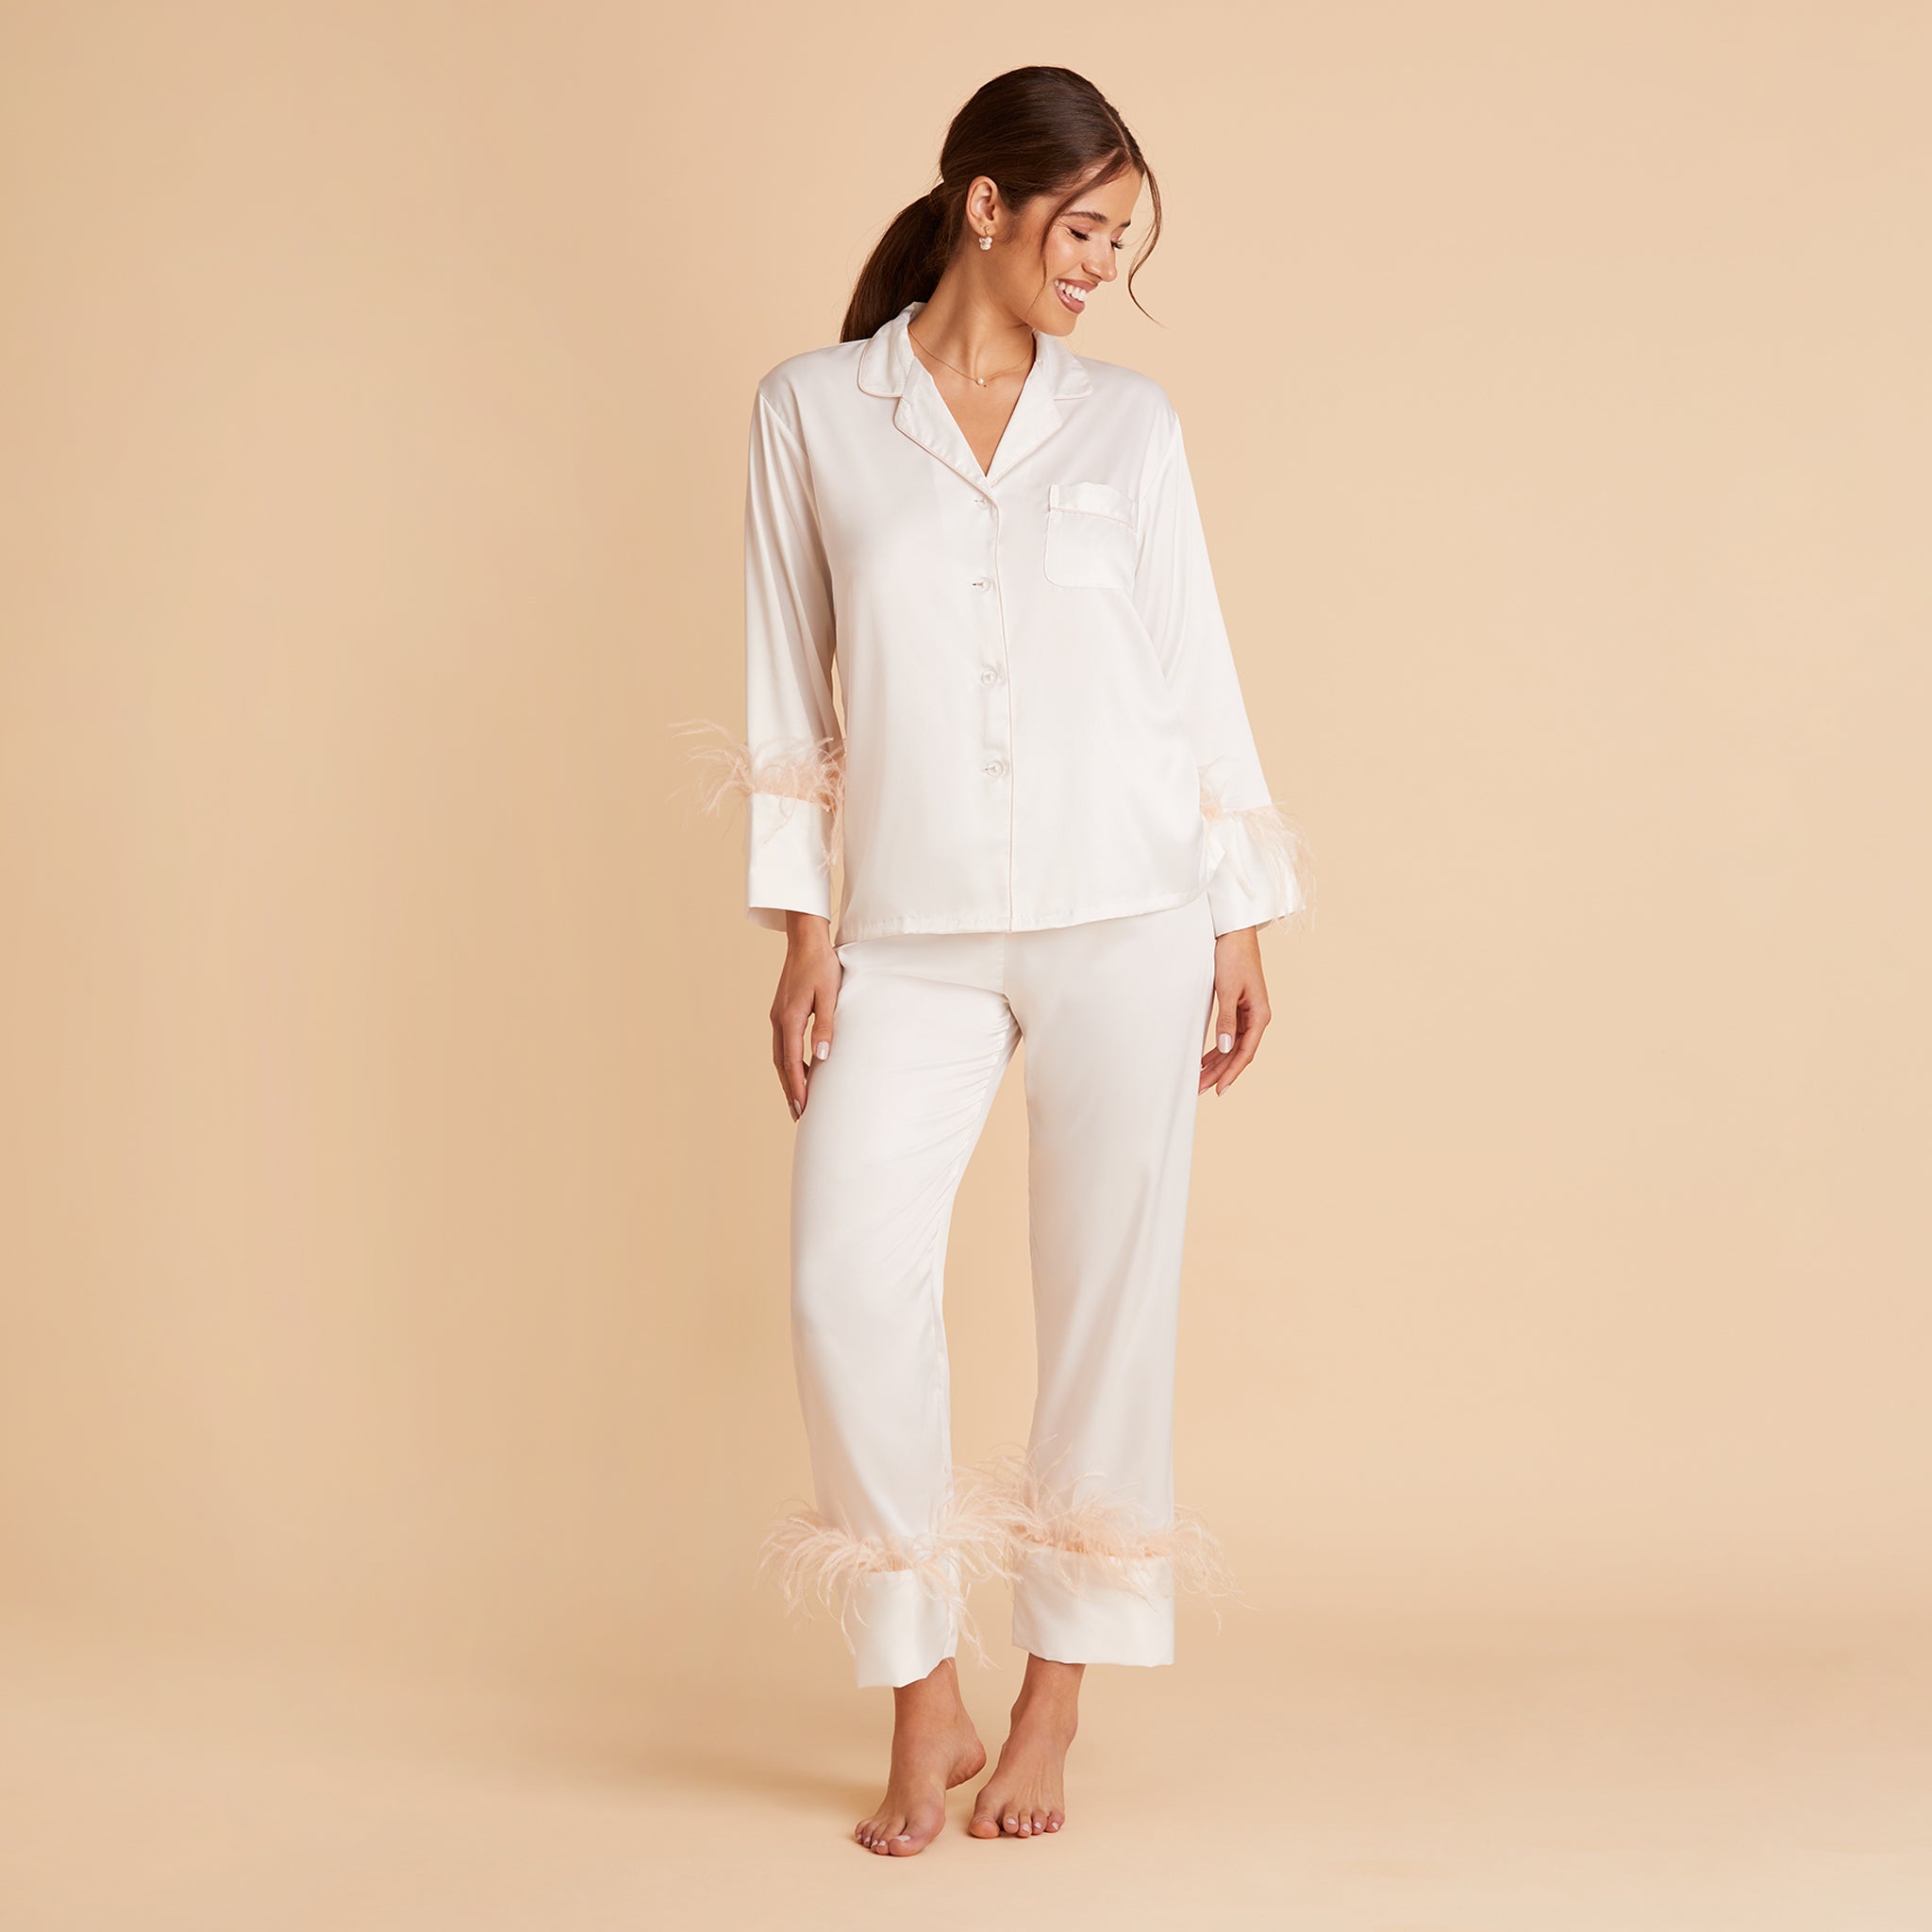 Feathered Pajama Set in white by Birdy Grey, front view